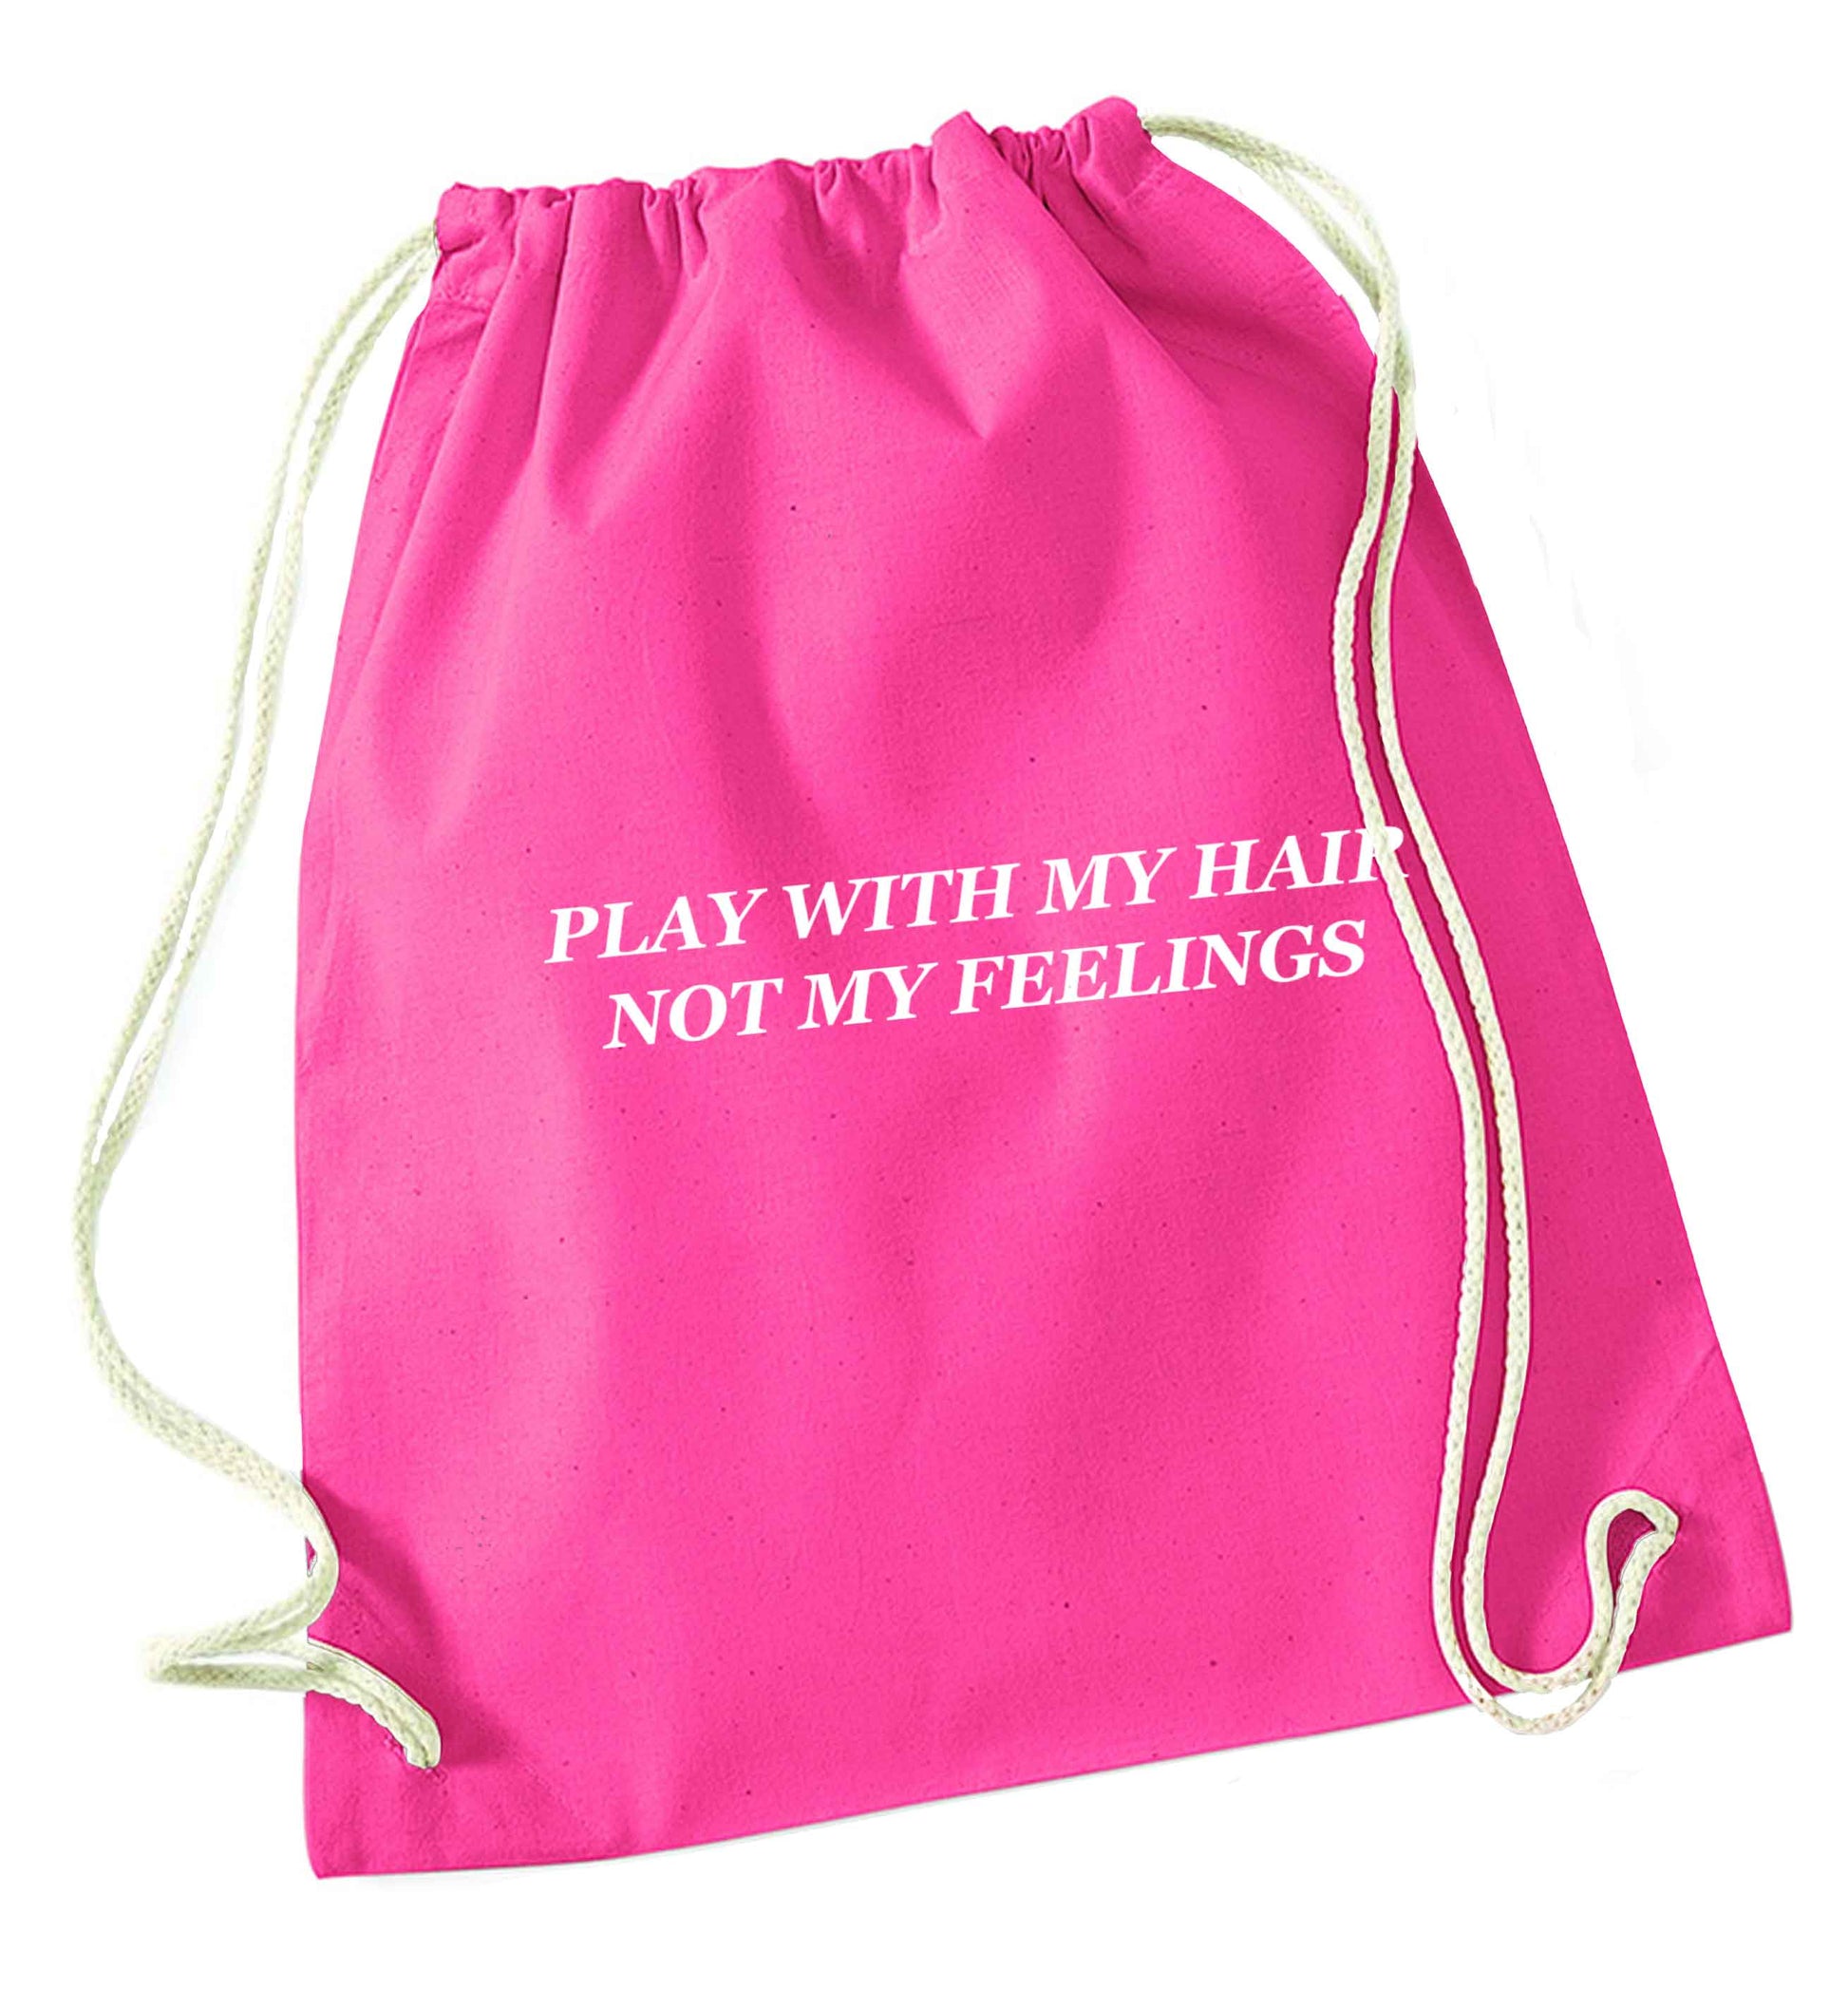 Play with my hair not my feelings pink drawstring bag